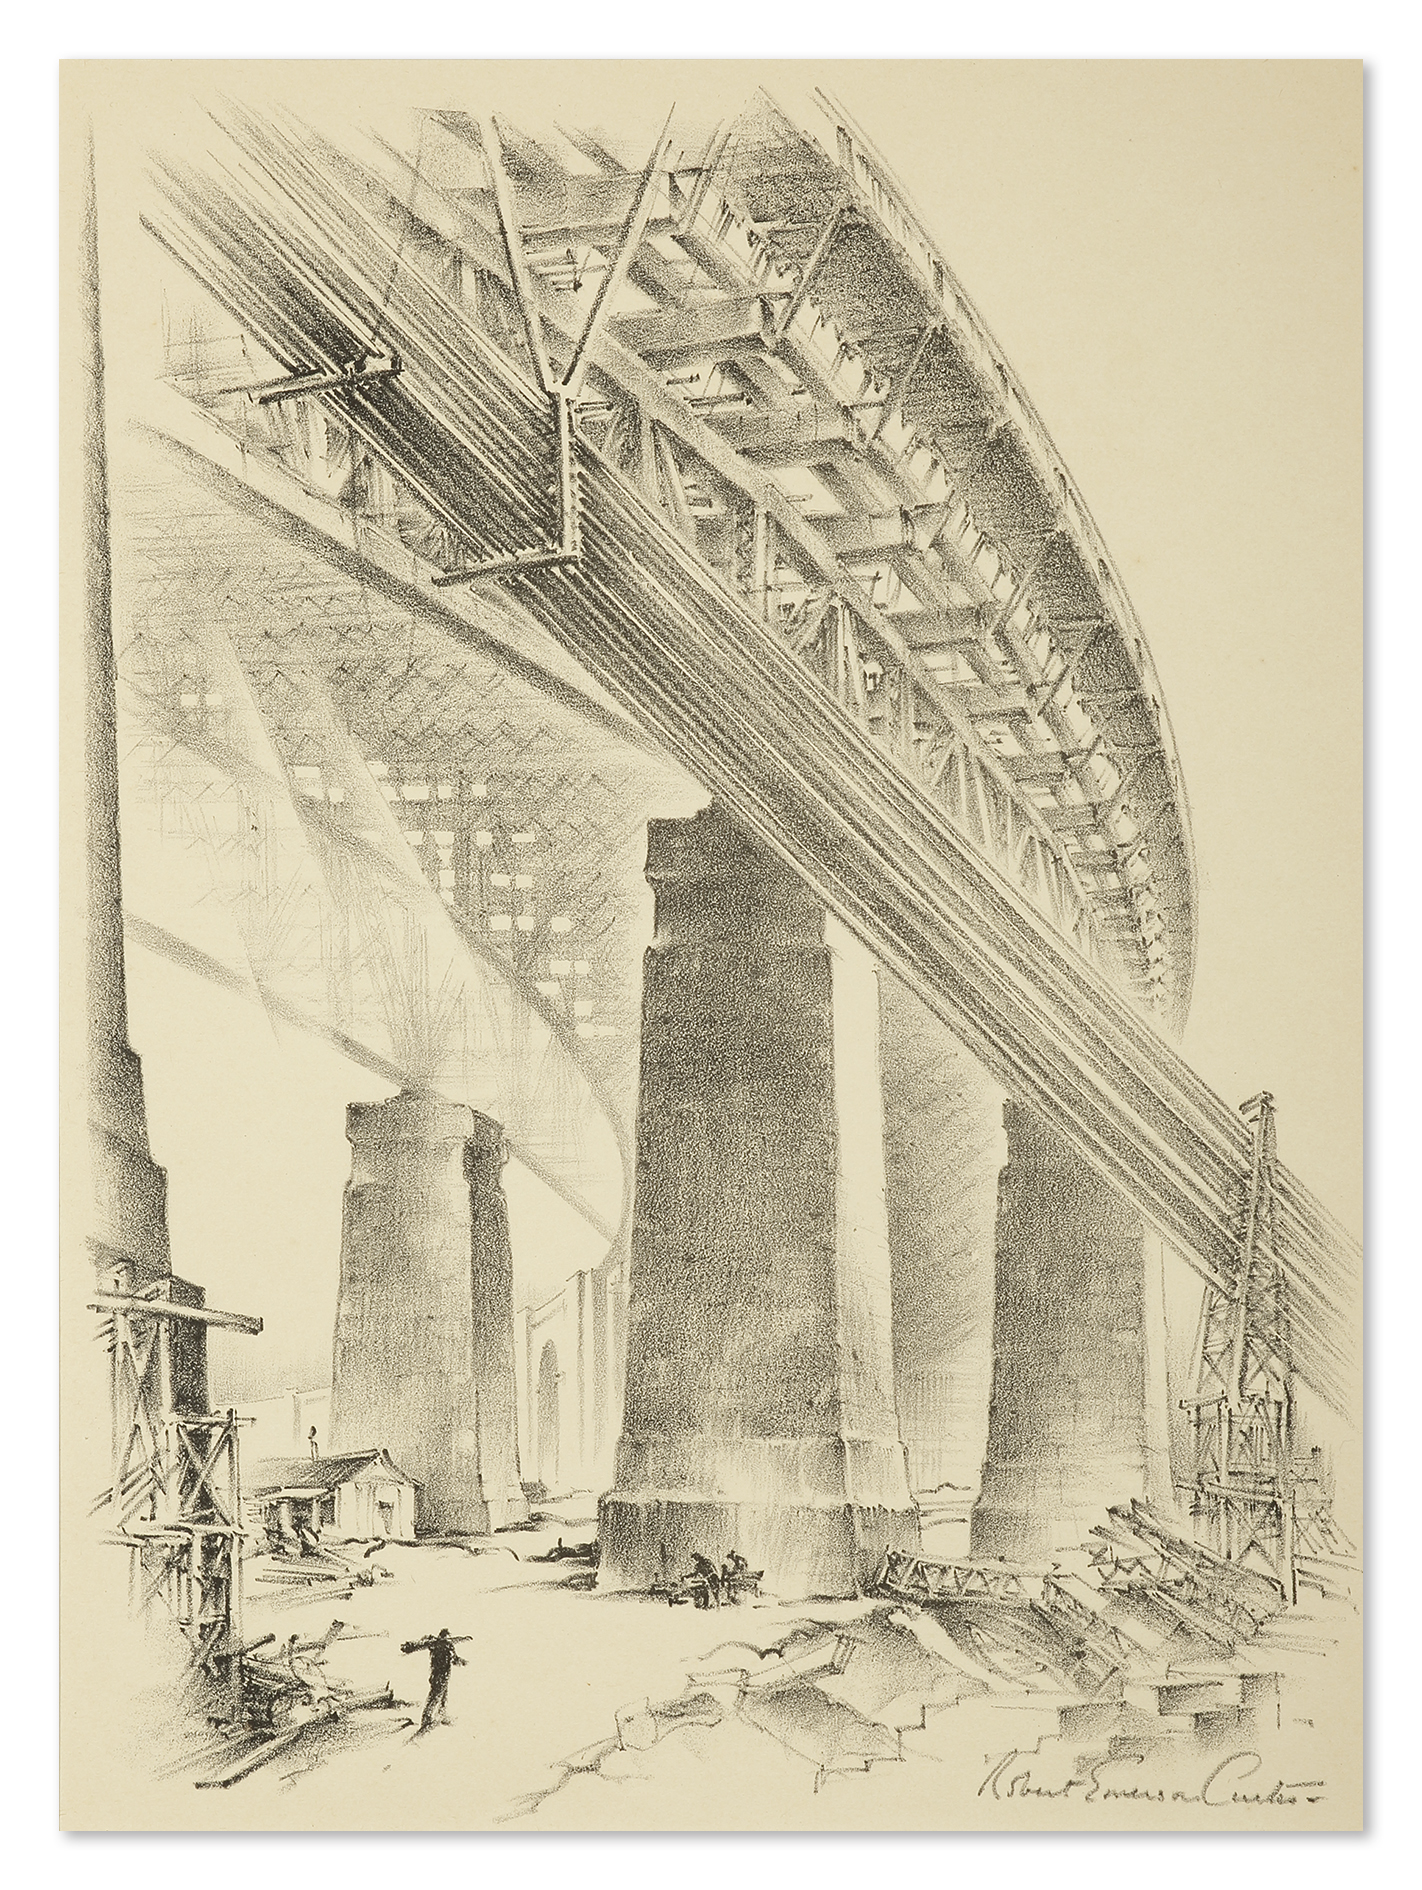 The North Shore Approach (Sydney Harbour Bridge) - Vintage Print from 1934